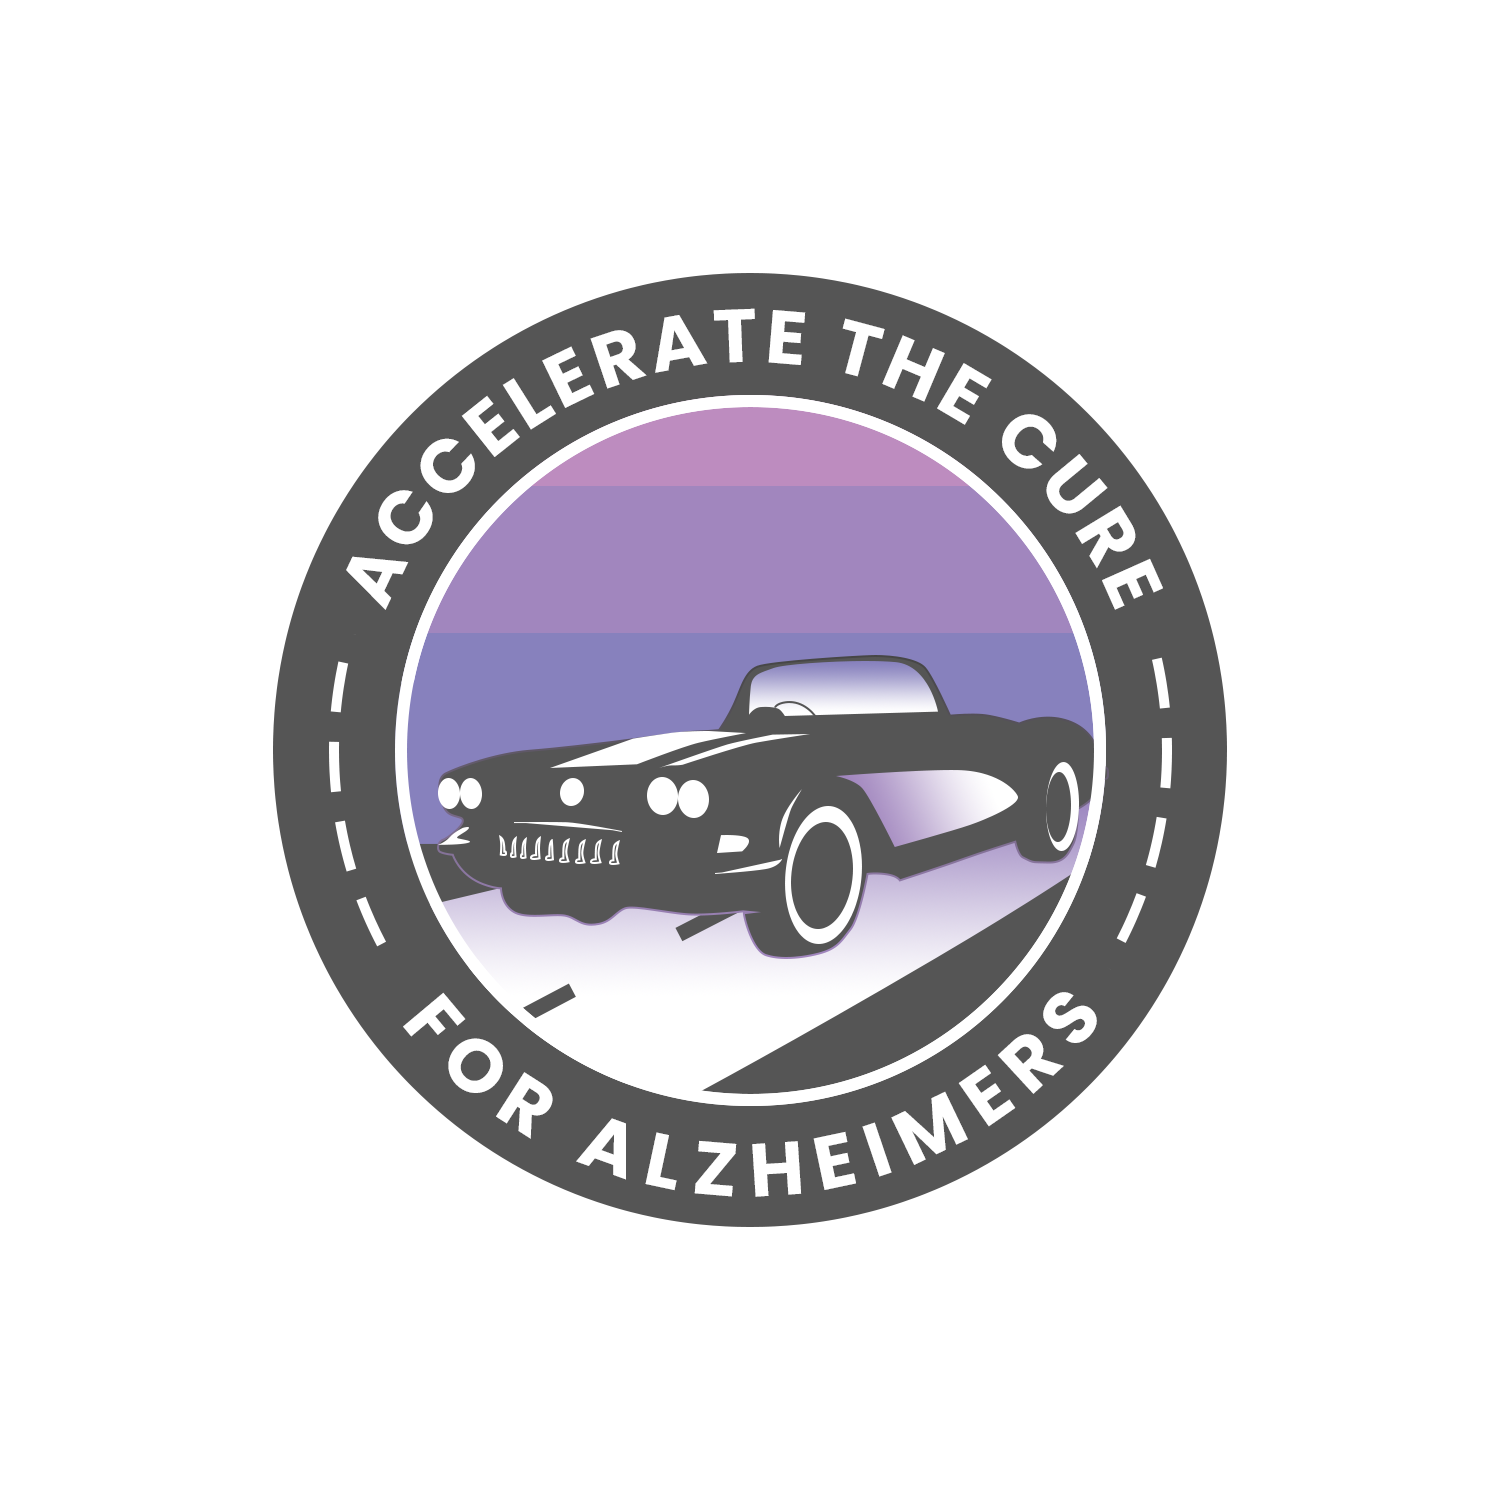 Accelerate the cure for Alzheimer's logo